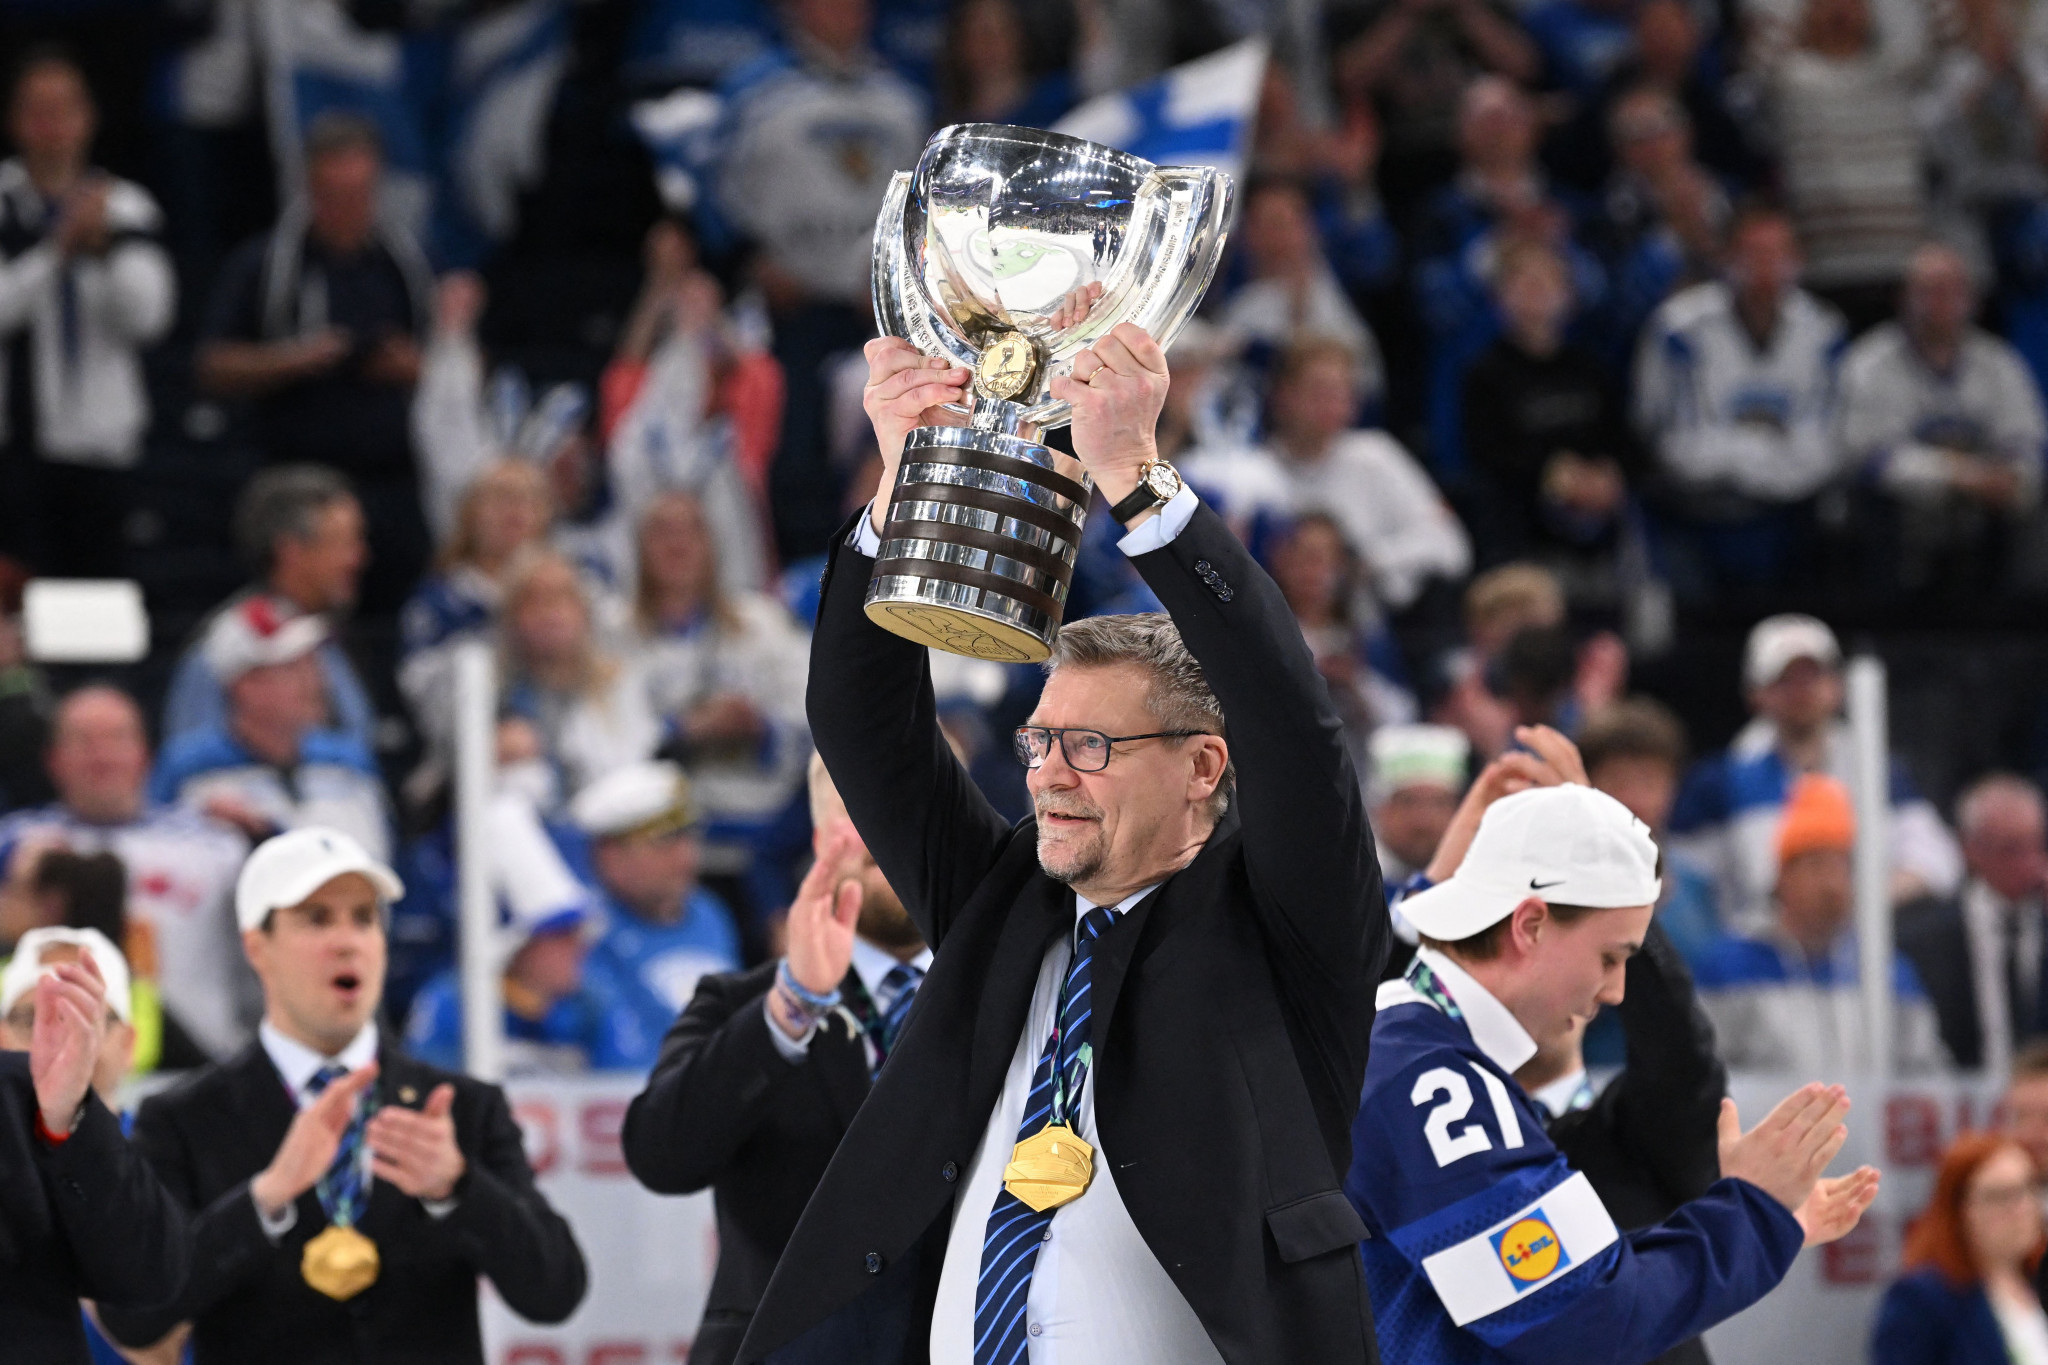 Finland ice hockey coach Jalonen has deal extended to 2024